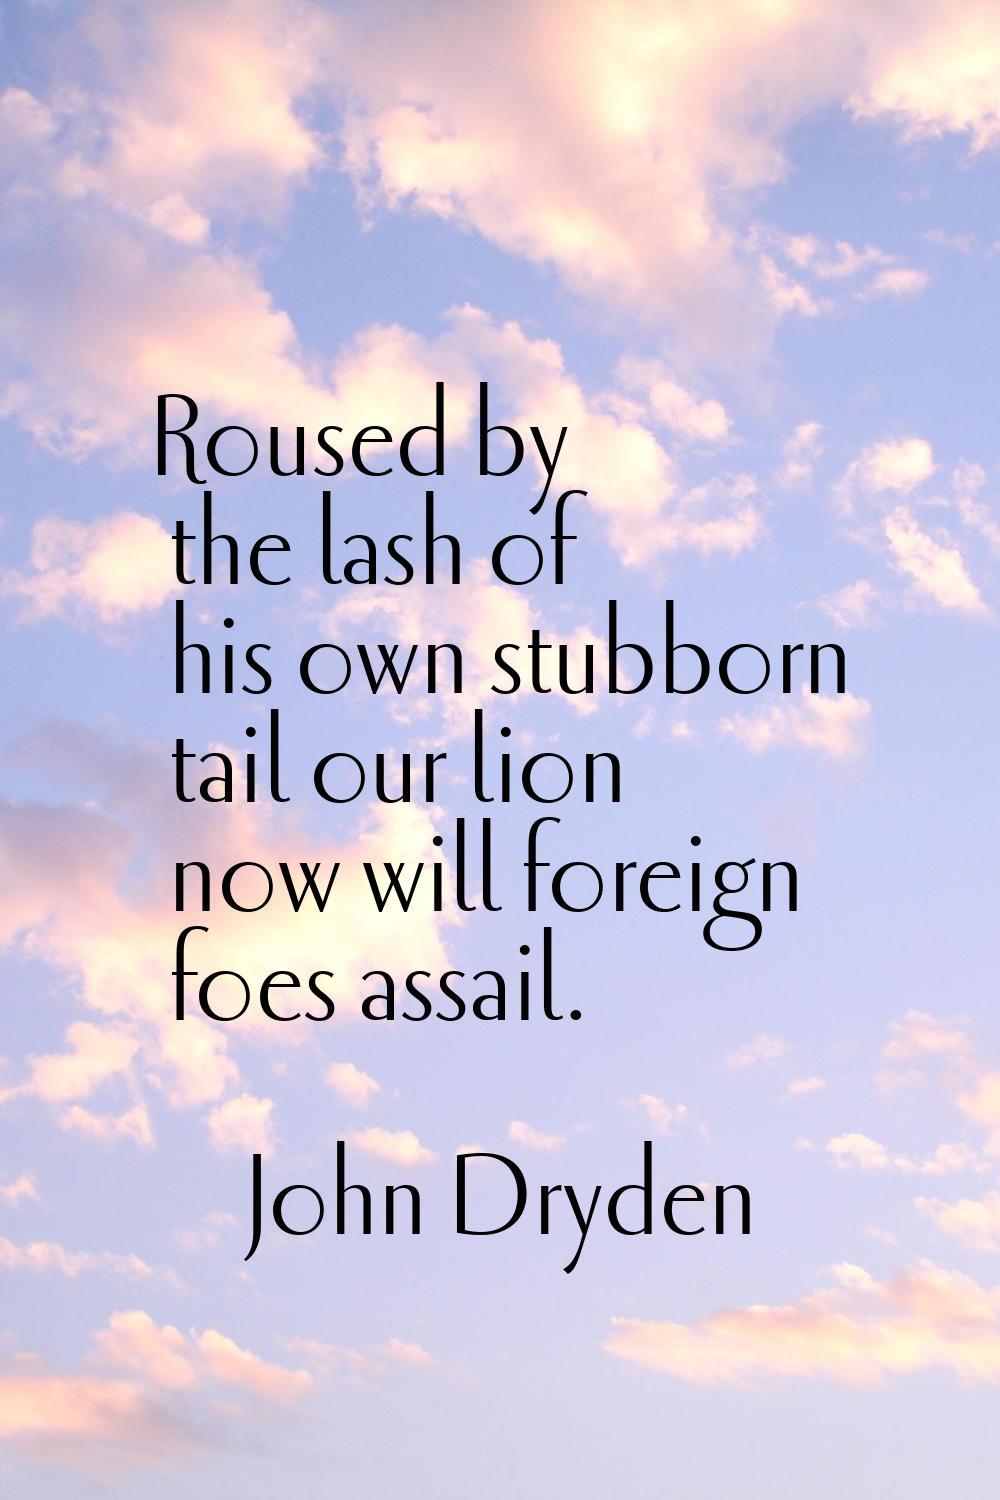 Roused by the lash of his own stubborn tail our lion now will foreign foes assail.